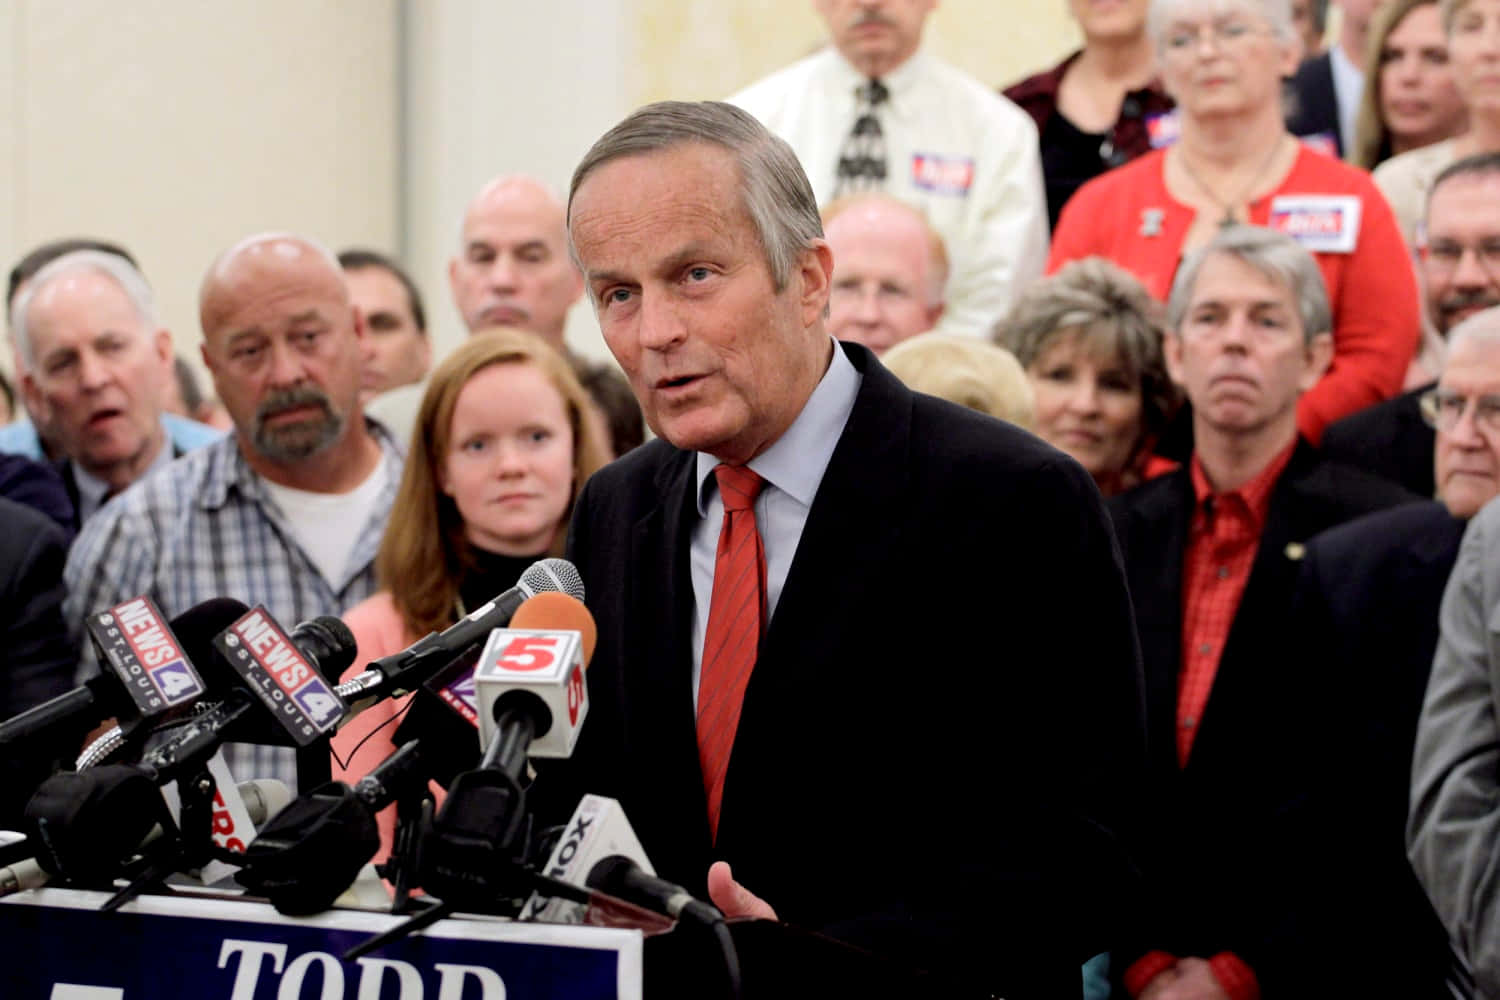 Todd Akin Speaking With Audience Picture